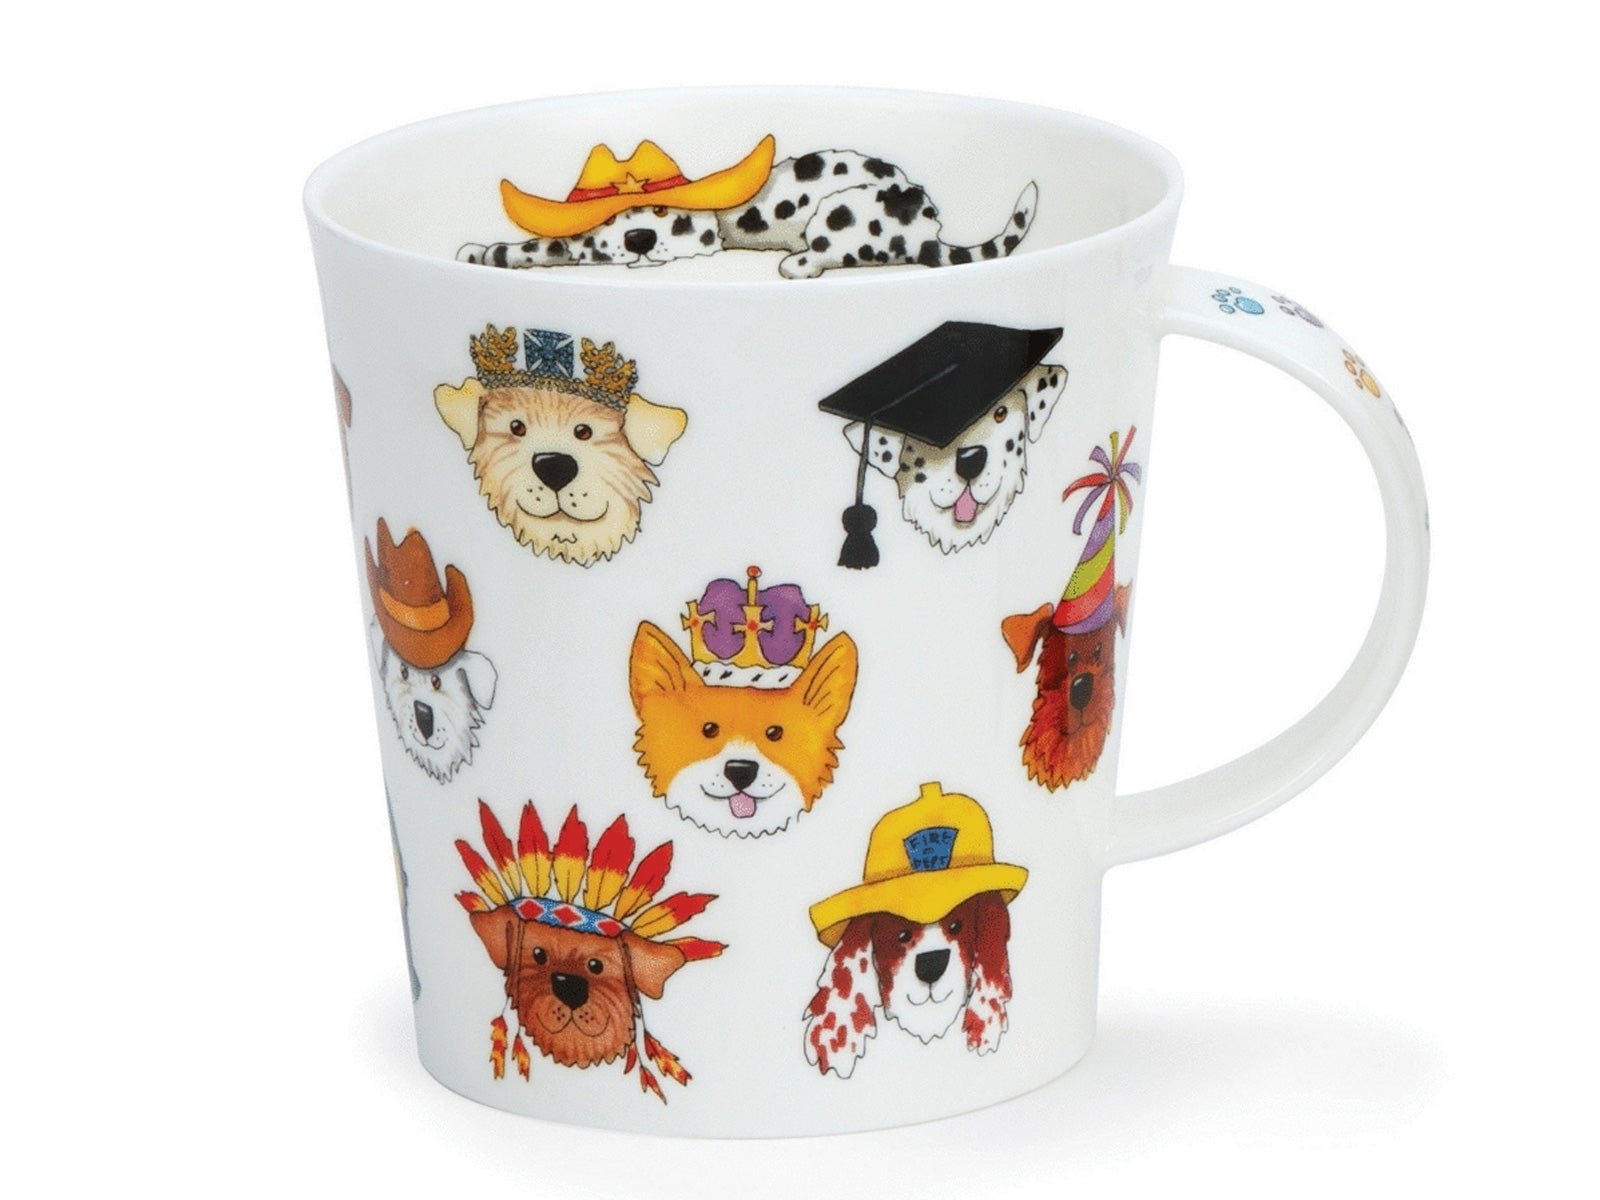 A white fine-bone china mug featuring an assortment of illustrated dog heads of varying breeds, wearing hats in a comical fashion. It shows Terriers with a tam o' shanter bonnet, a Corgi with a crown & a Dalmatian with a graduation cap, just to name a few. The inner rim features a black and white Dalmatian with a Western hat and an orange dog with a sombrero.